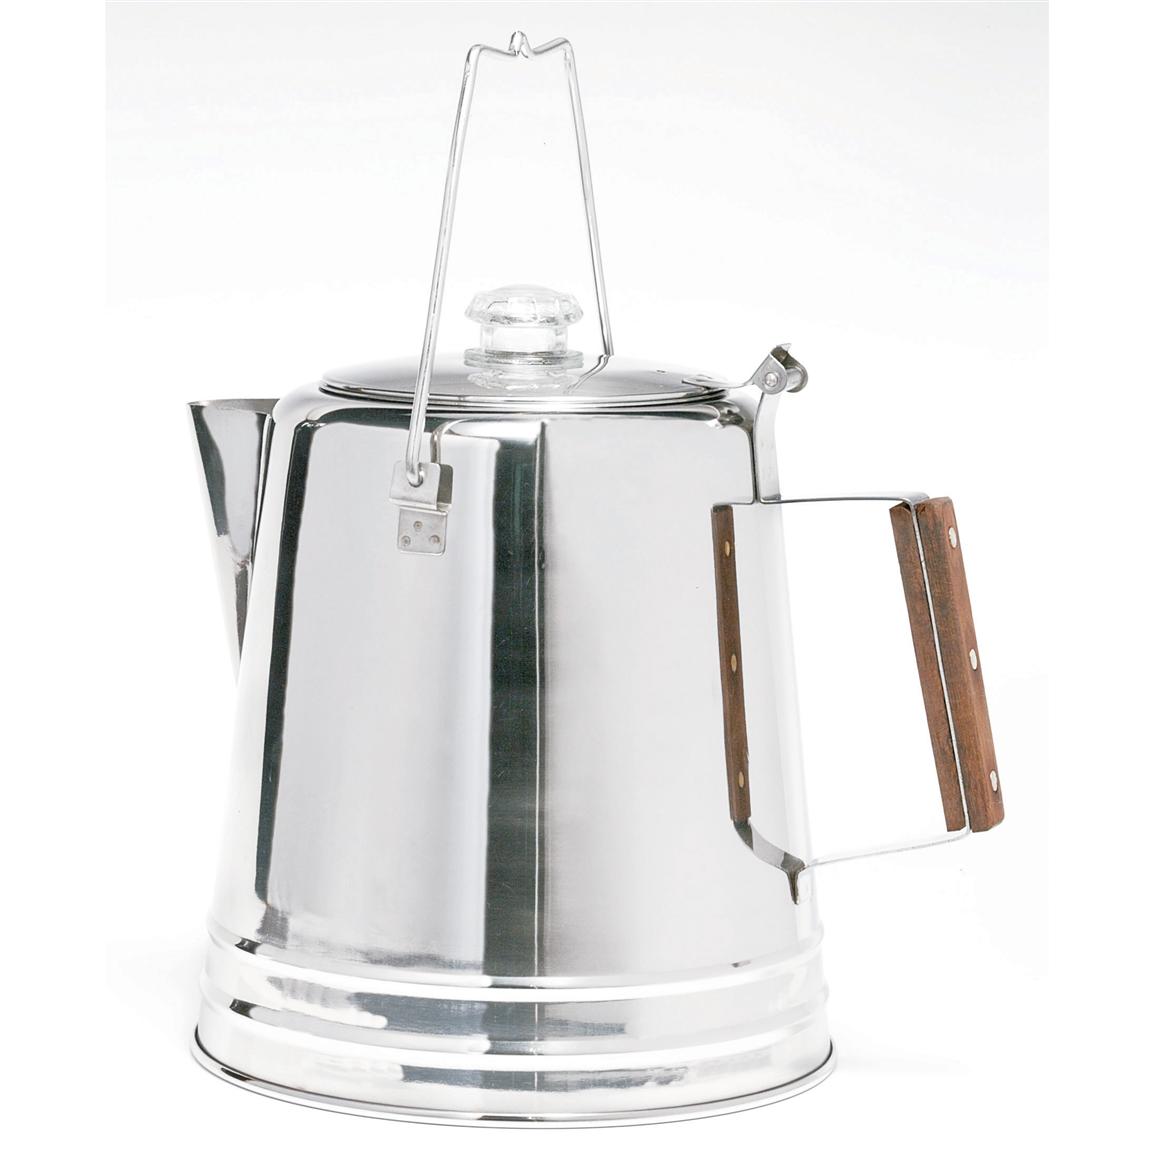 28-cup Stainless Steel Percolator